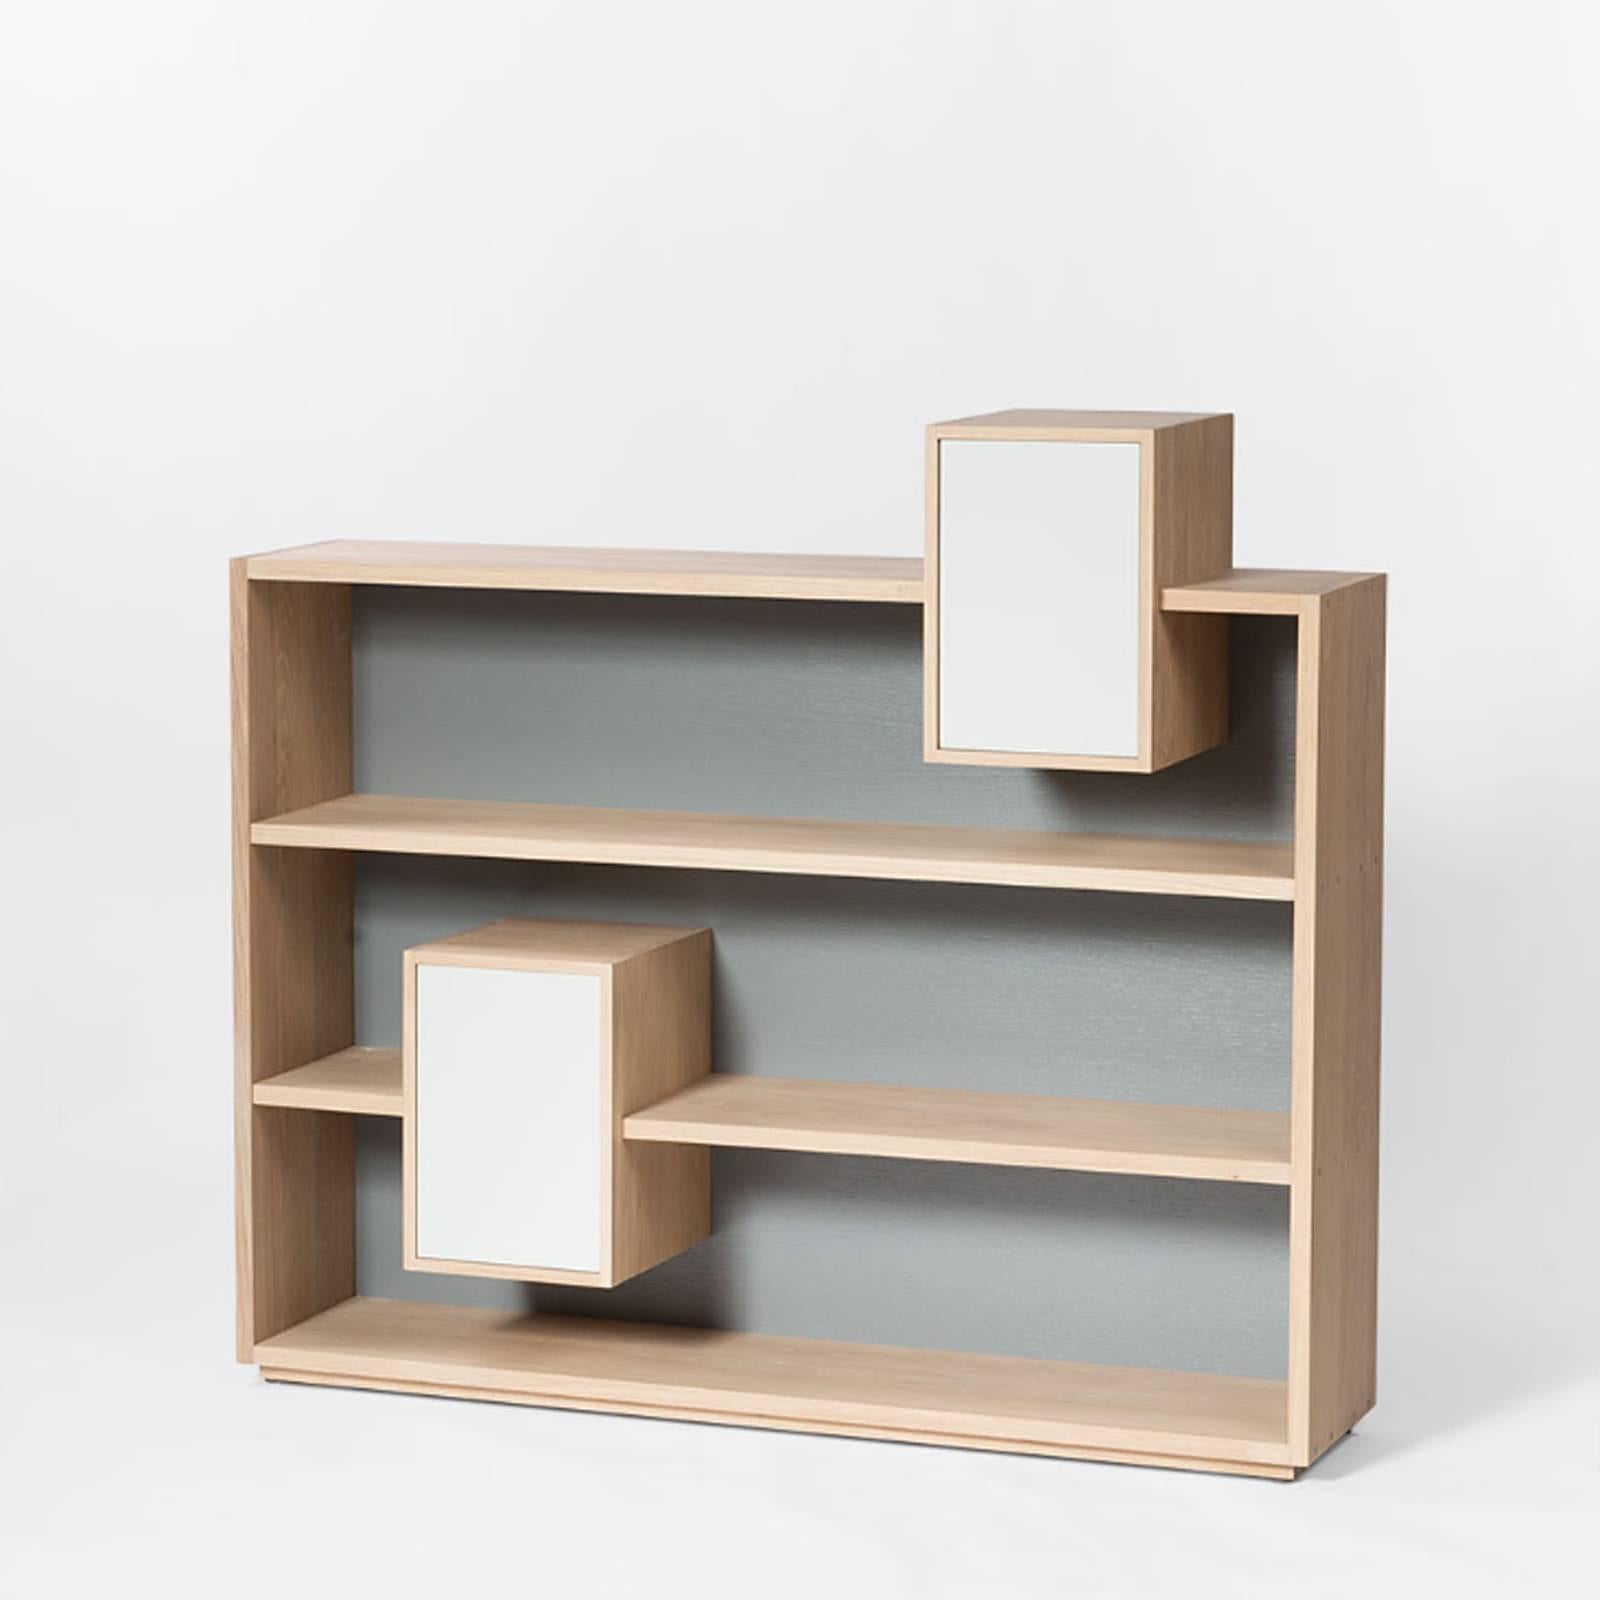 Shelve functional 100% solid French raw oak, from sustainable
Forests, France. With grey back and two white doors. Back and 
Doors colors can be selected in different colors, on request. 
From Anjou in France.
Available in raw oak, price: